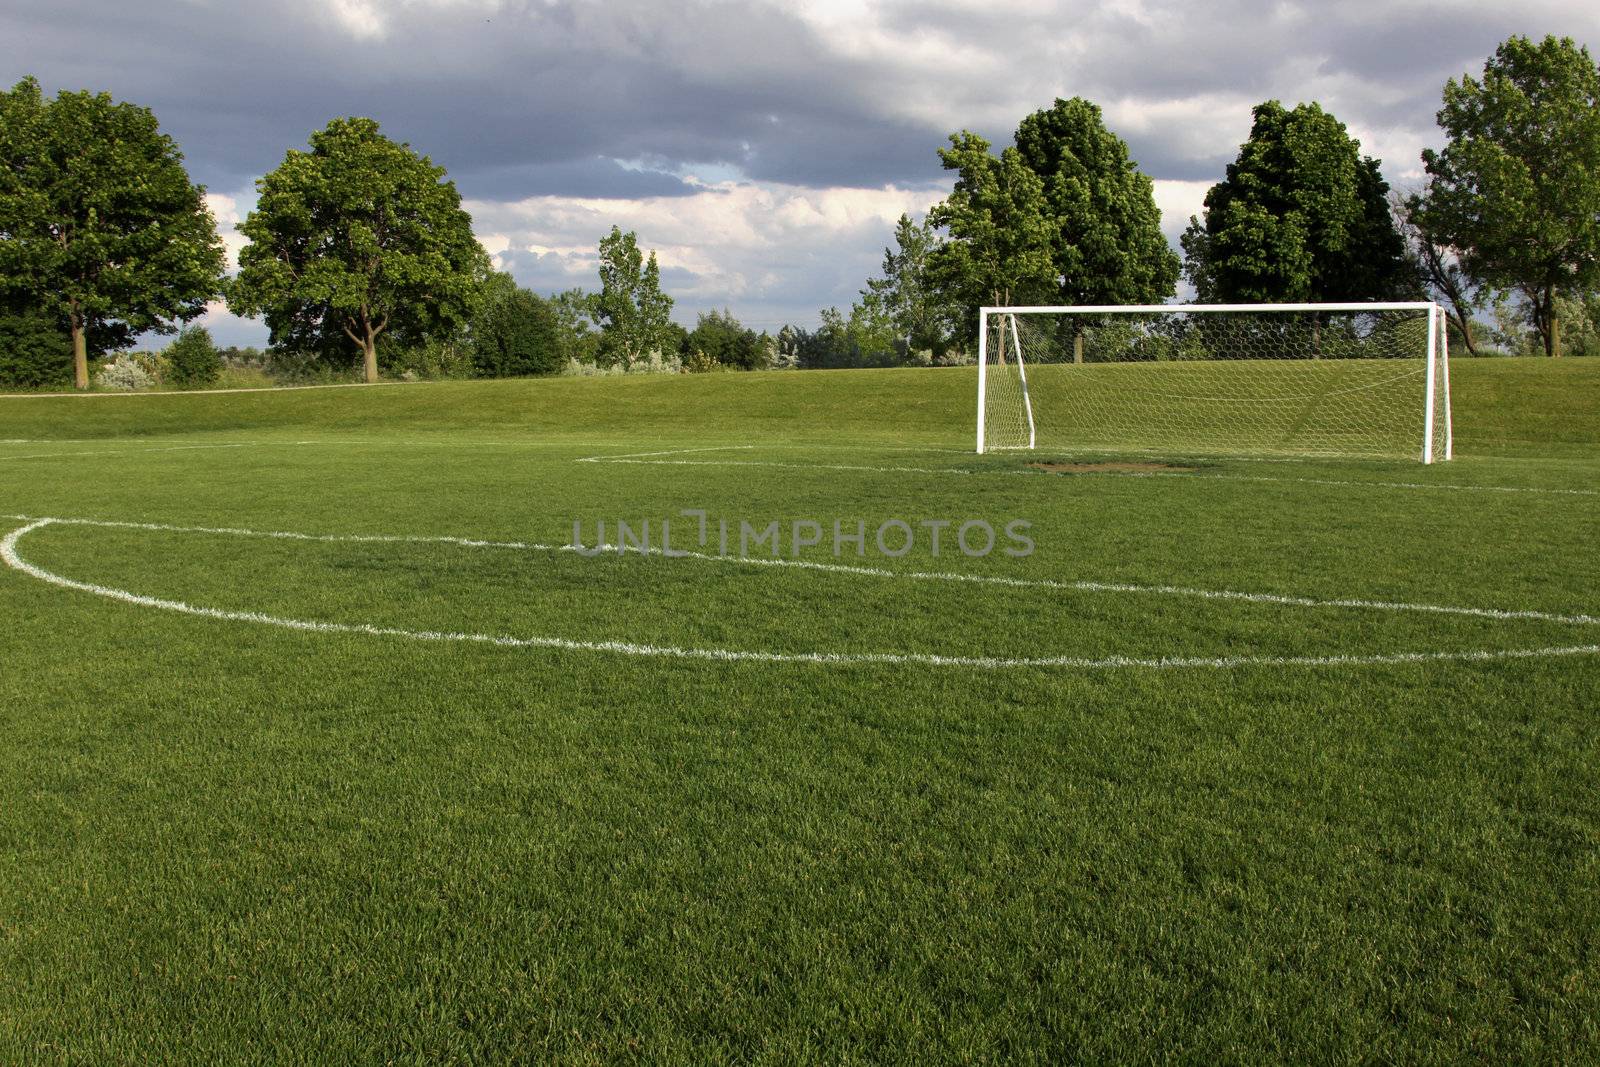 Unoccupied Soccer Goal
 by ca2hill